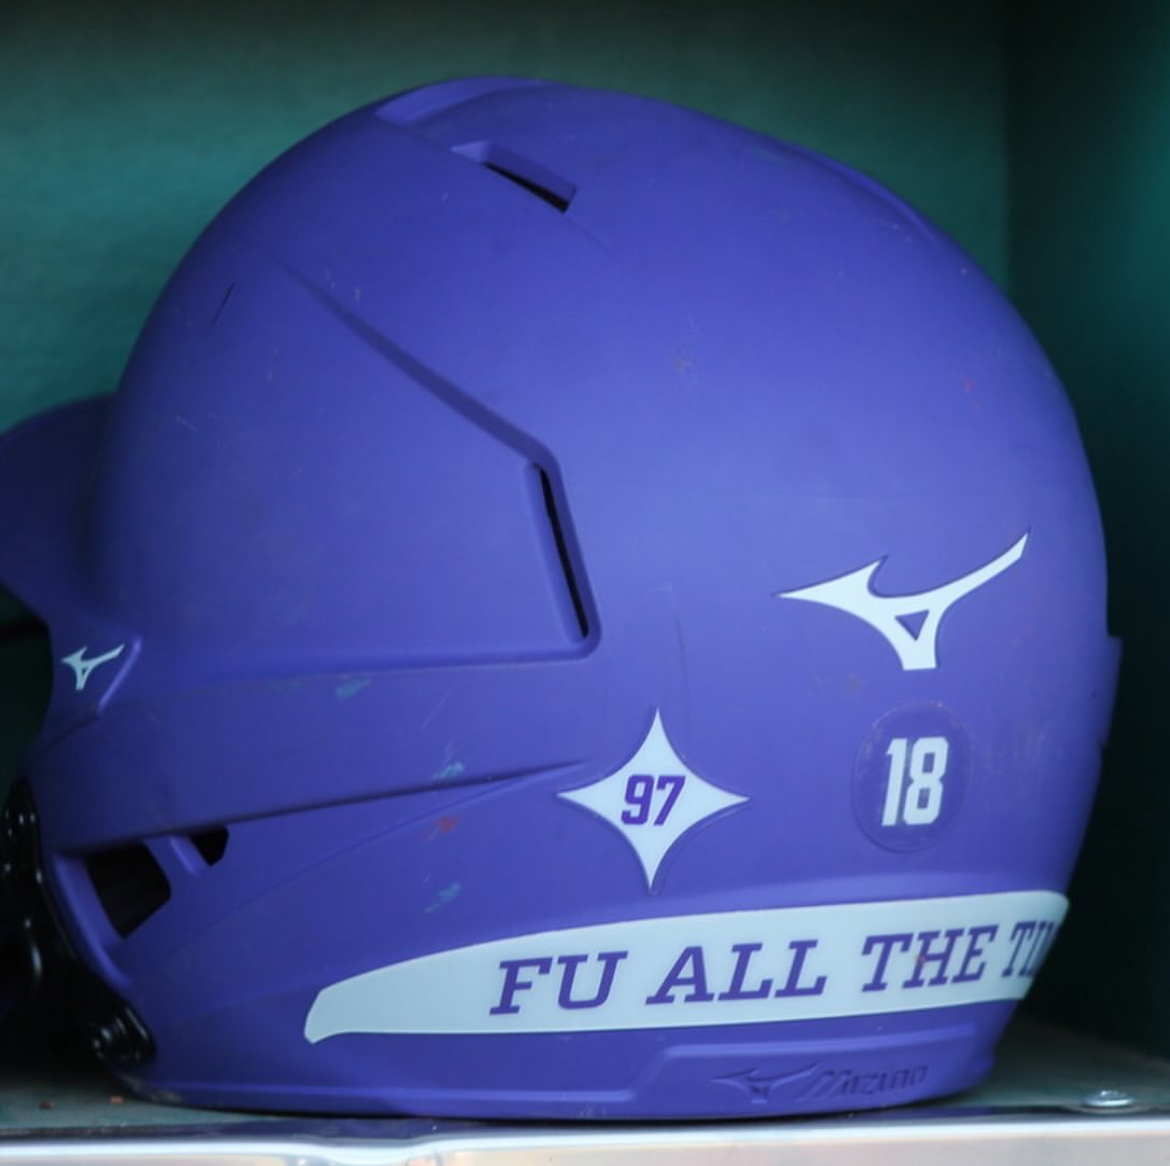 First pitch between Furman and Western Carolina is set for 1:10 p.m. Watch us on ESPN+!